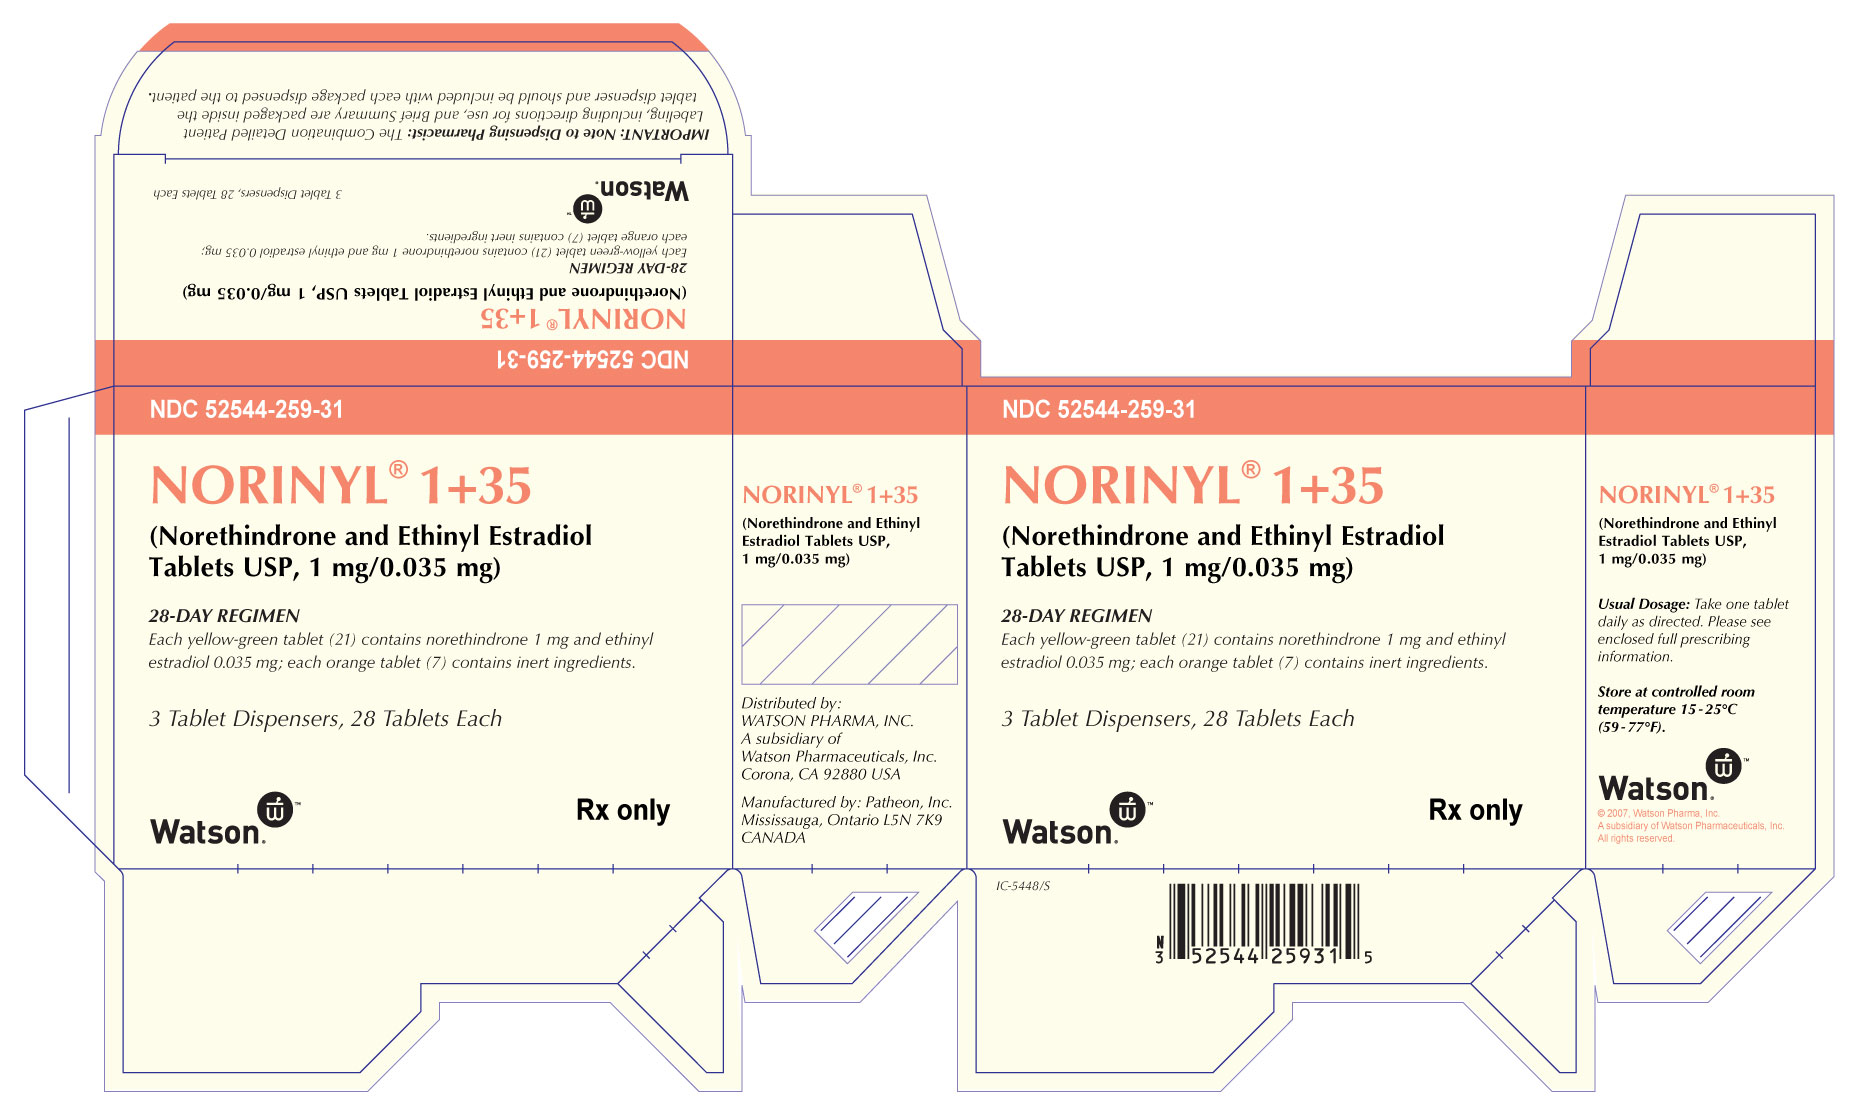 NORINYL® 1+35 (Norethindrone and Ethinyl Estradiol Tablets USP, 1mg/0.035 mg) NDC 52544-259-28 Carton x 6 - 28 Tablet Dispensers